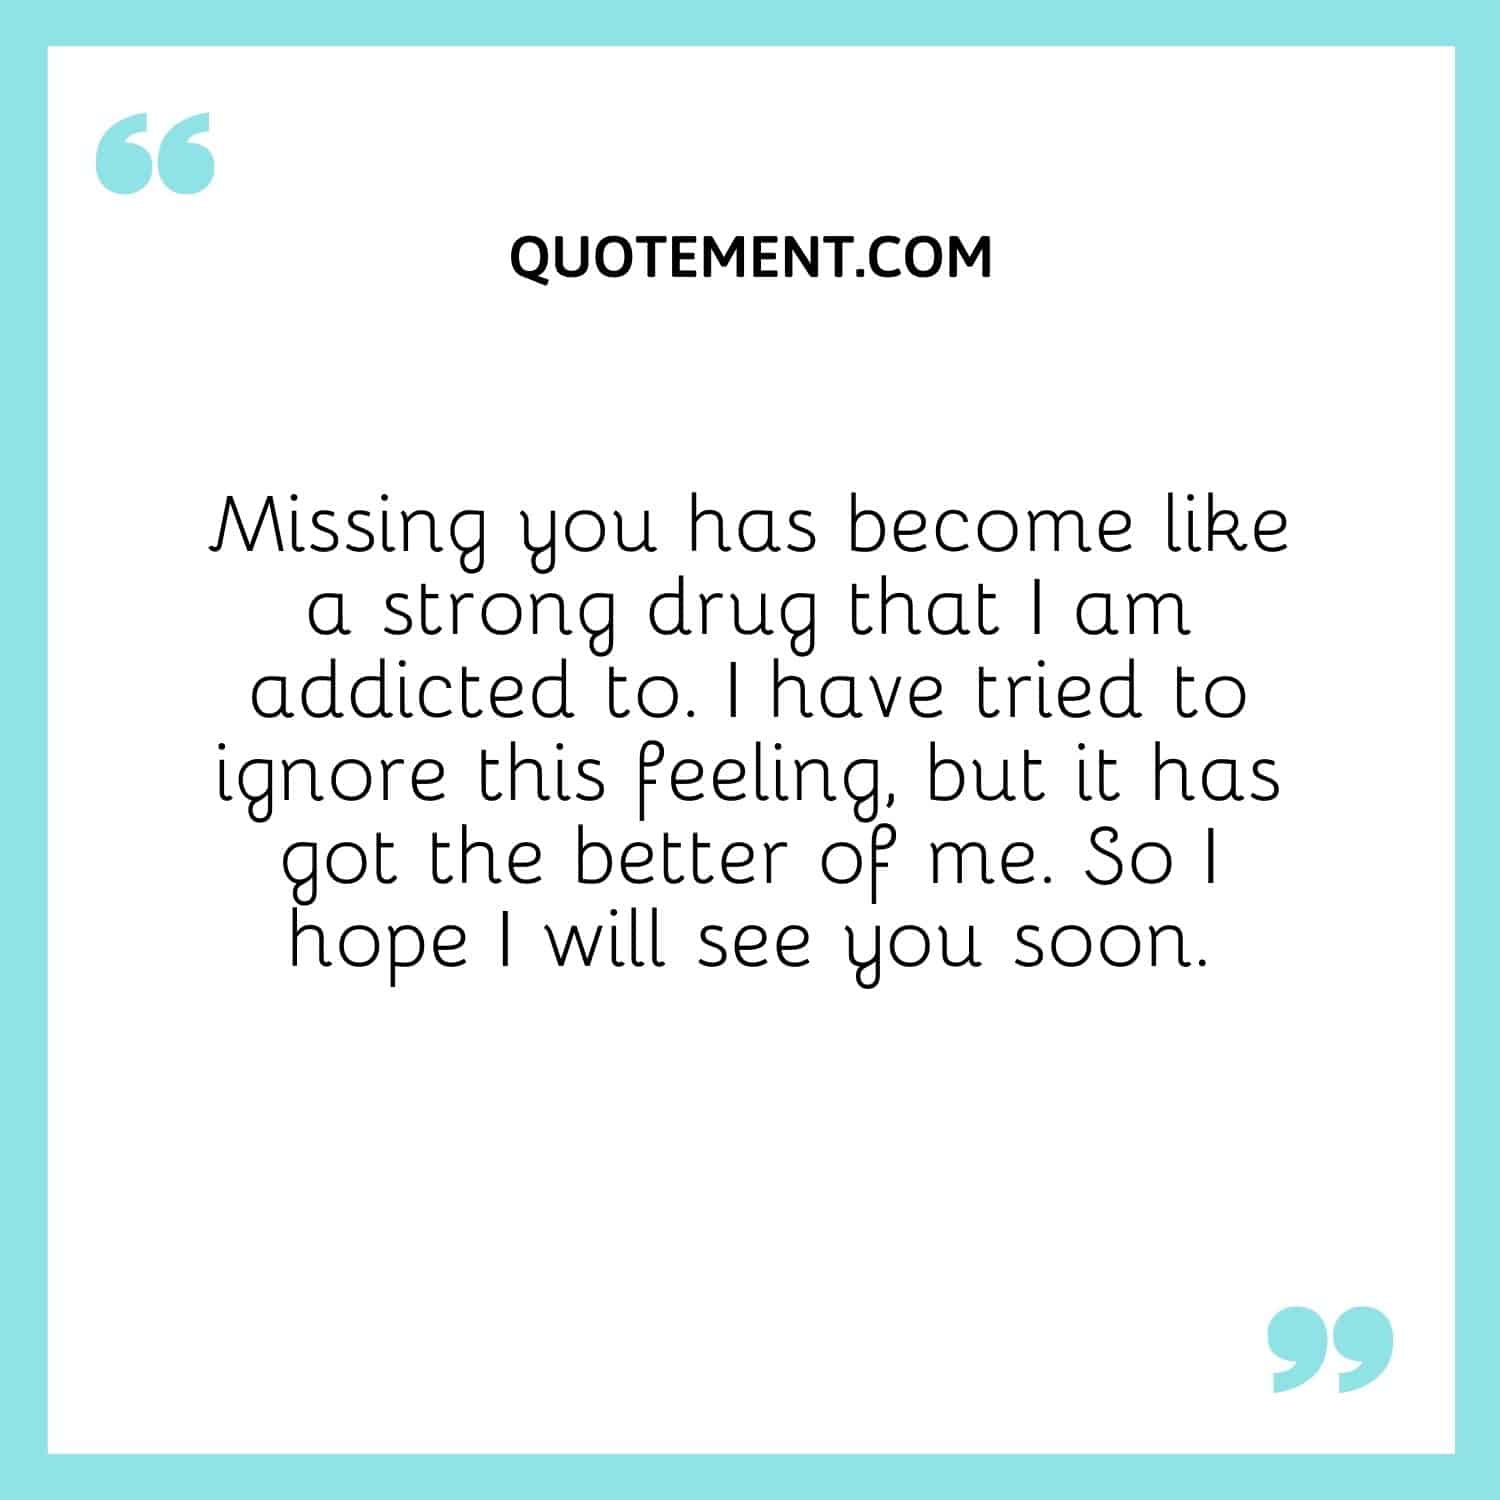 Missing you has become like a strong drug that I am addicted to. I have tried to ignore this feeling, but it has got the better of me. So I hope I will see you soon.